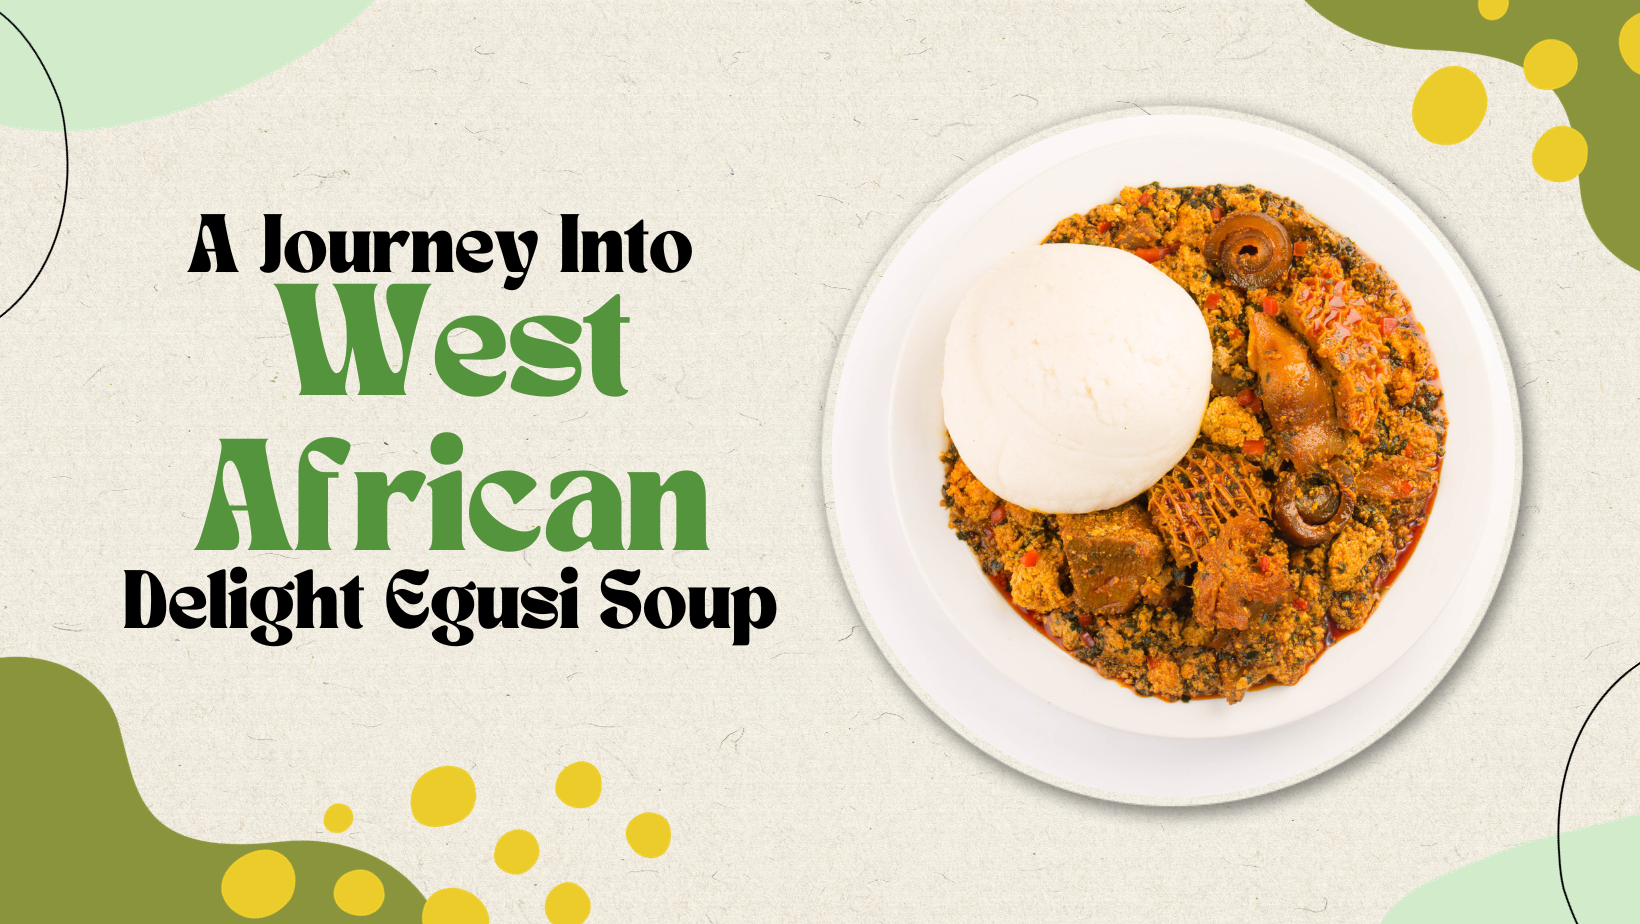 A Journey into West African Delight Egusi Soup